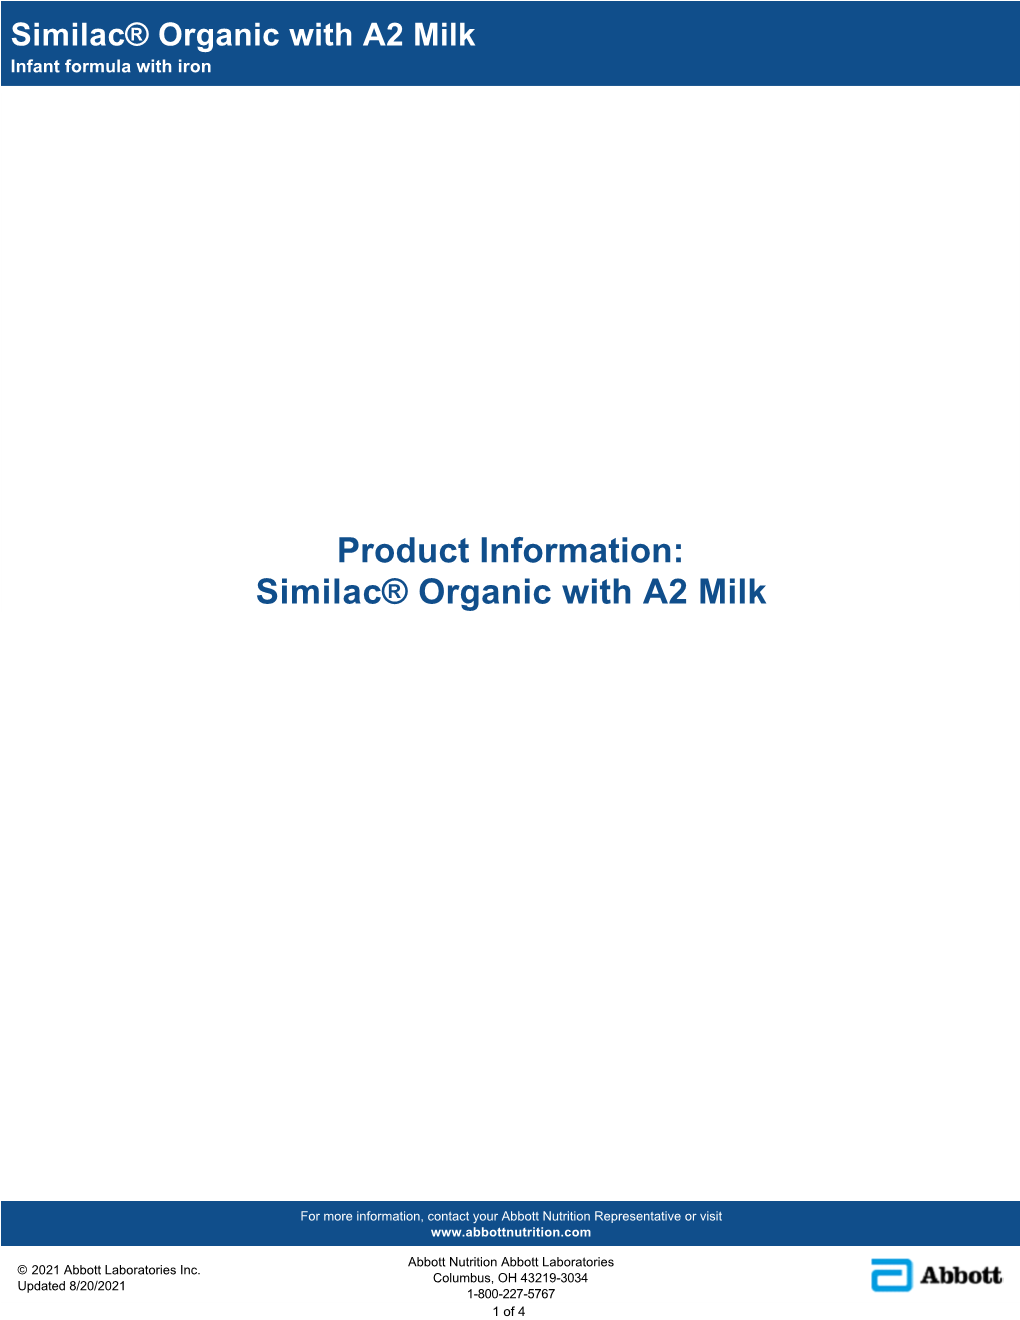 Similac® Organic with A2 Milk Infant Formula with Iron